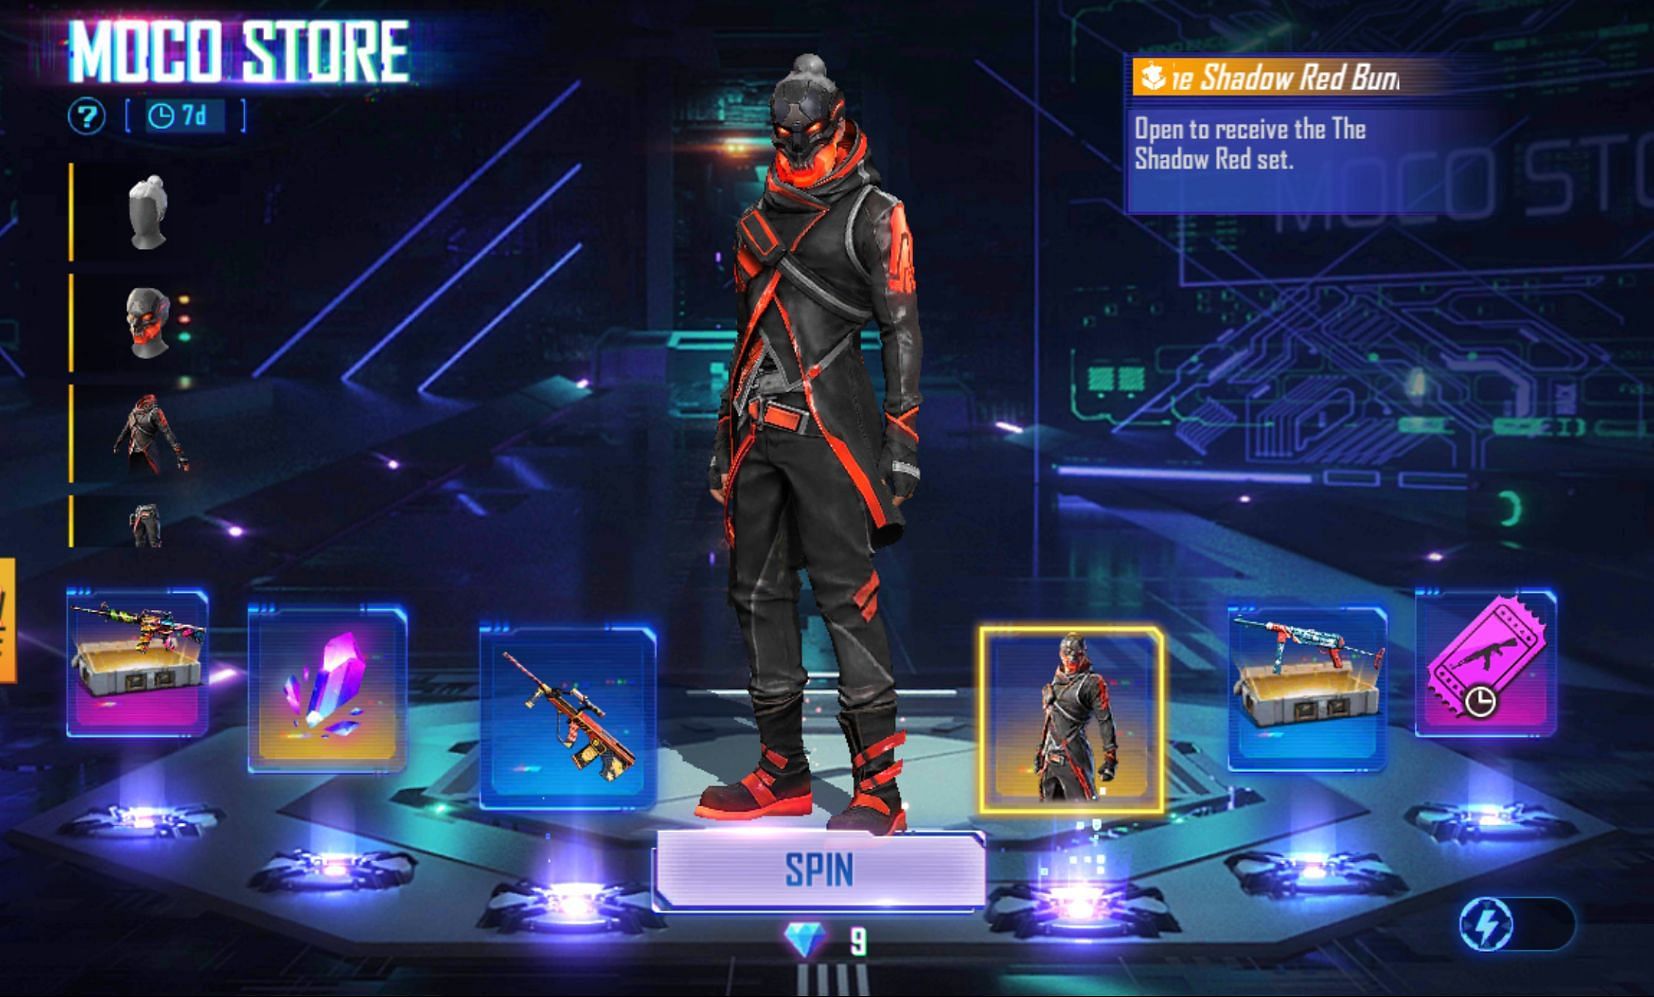 Upon choosing the items, users can start spinning (Image via Garena)